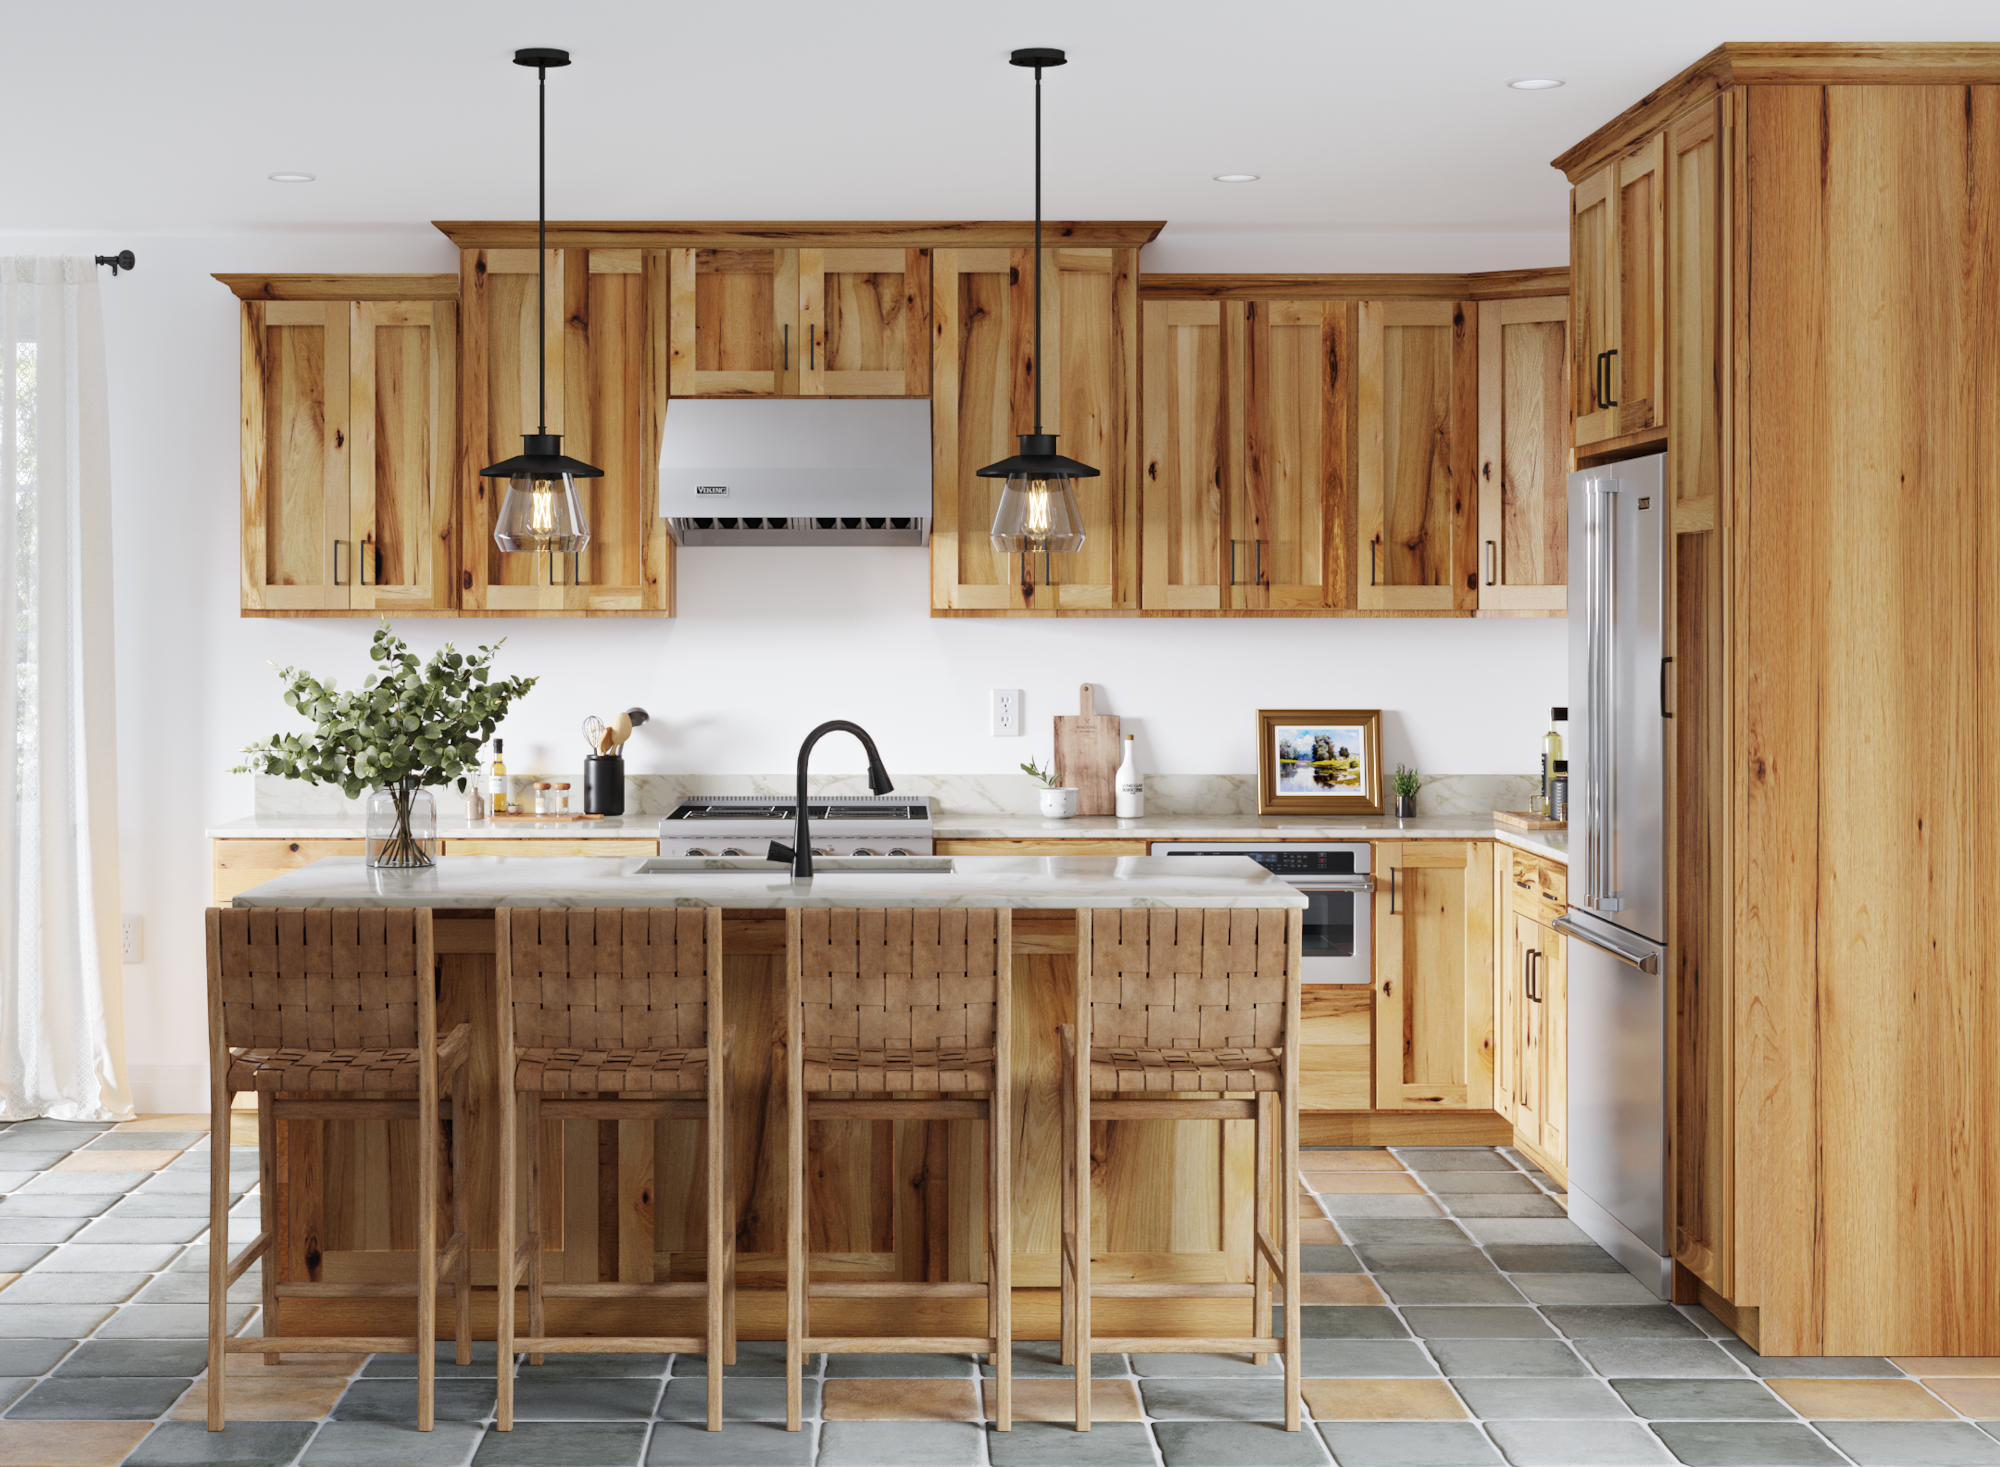 Hickory Cabinet Kitchen Ideas: Transform Your Space with Stunning Hickory Cabinets